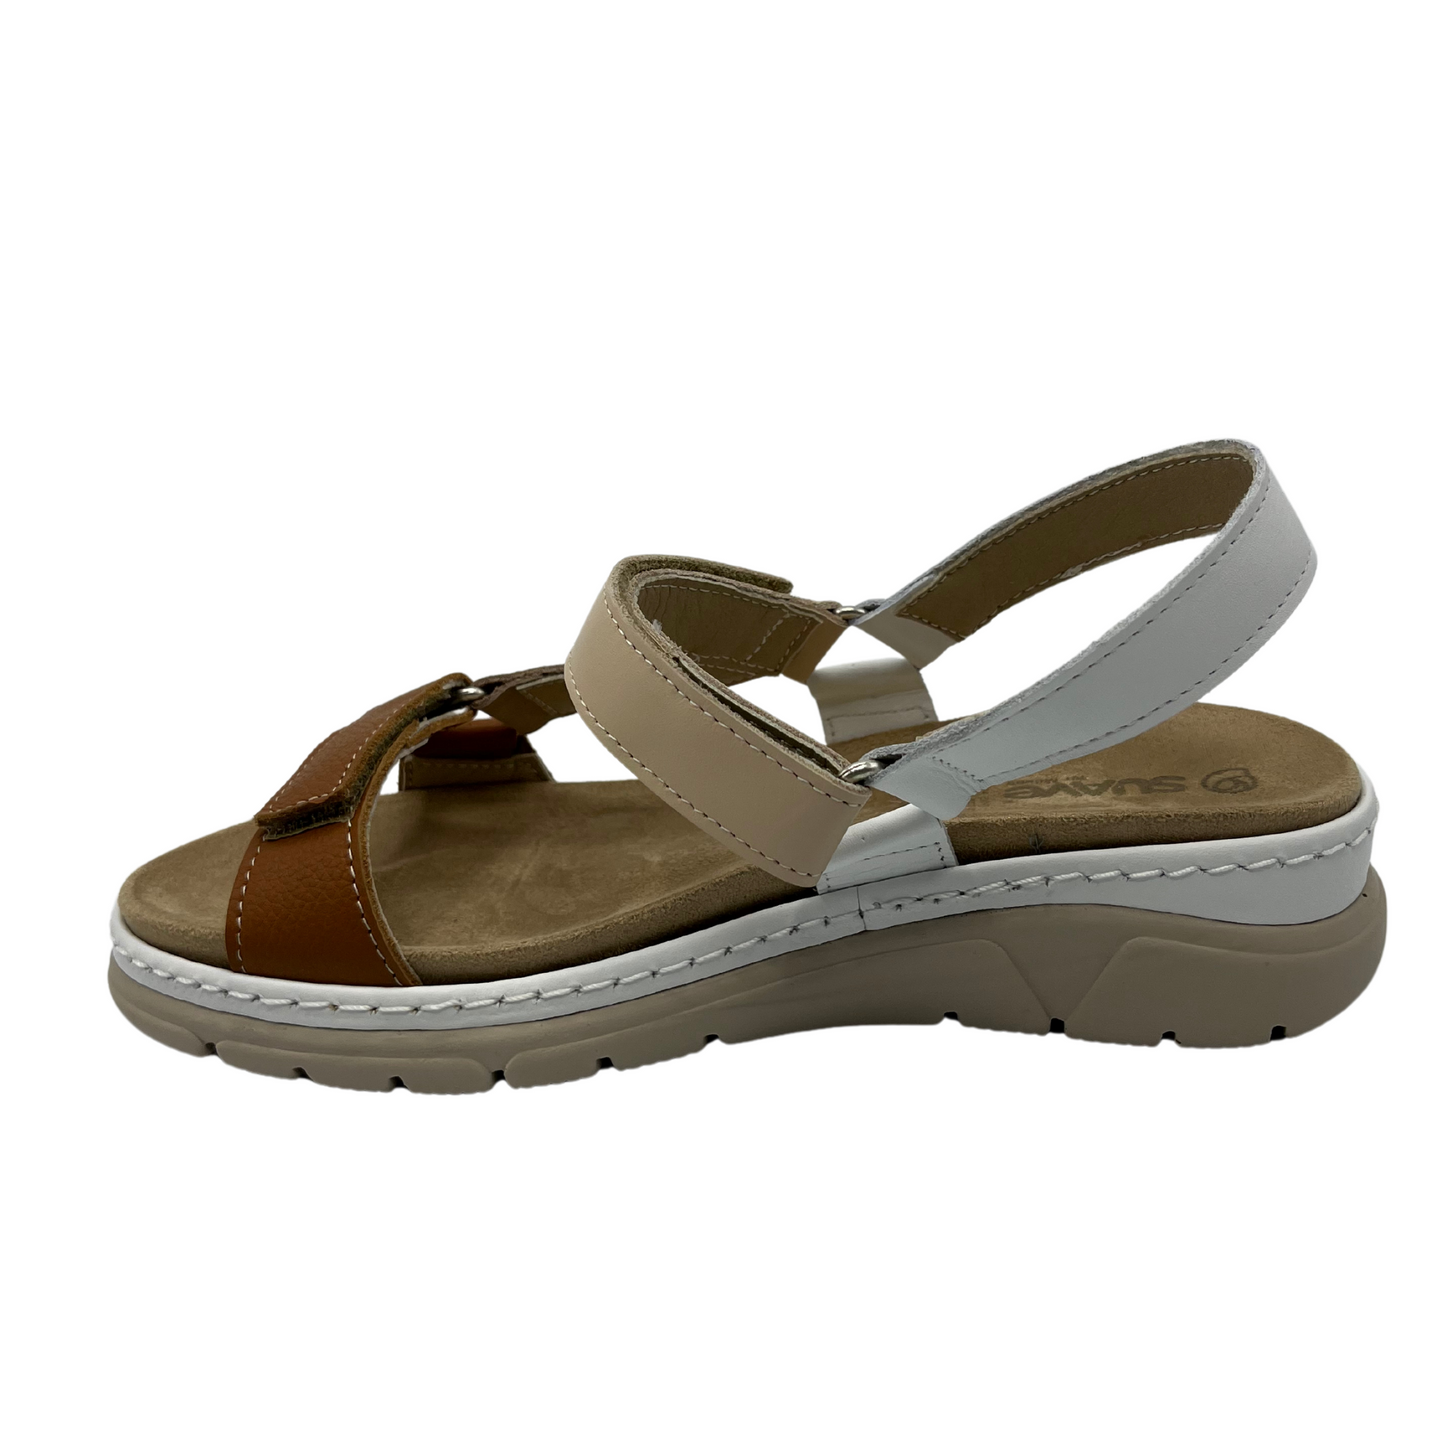 Left facing view of suede sandal with brown, white and tan straps